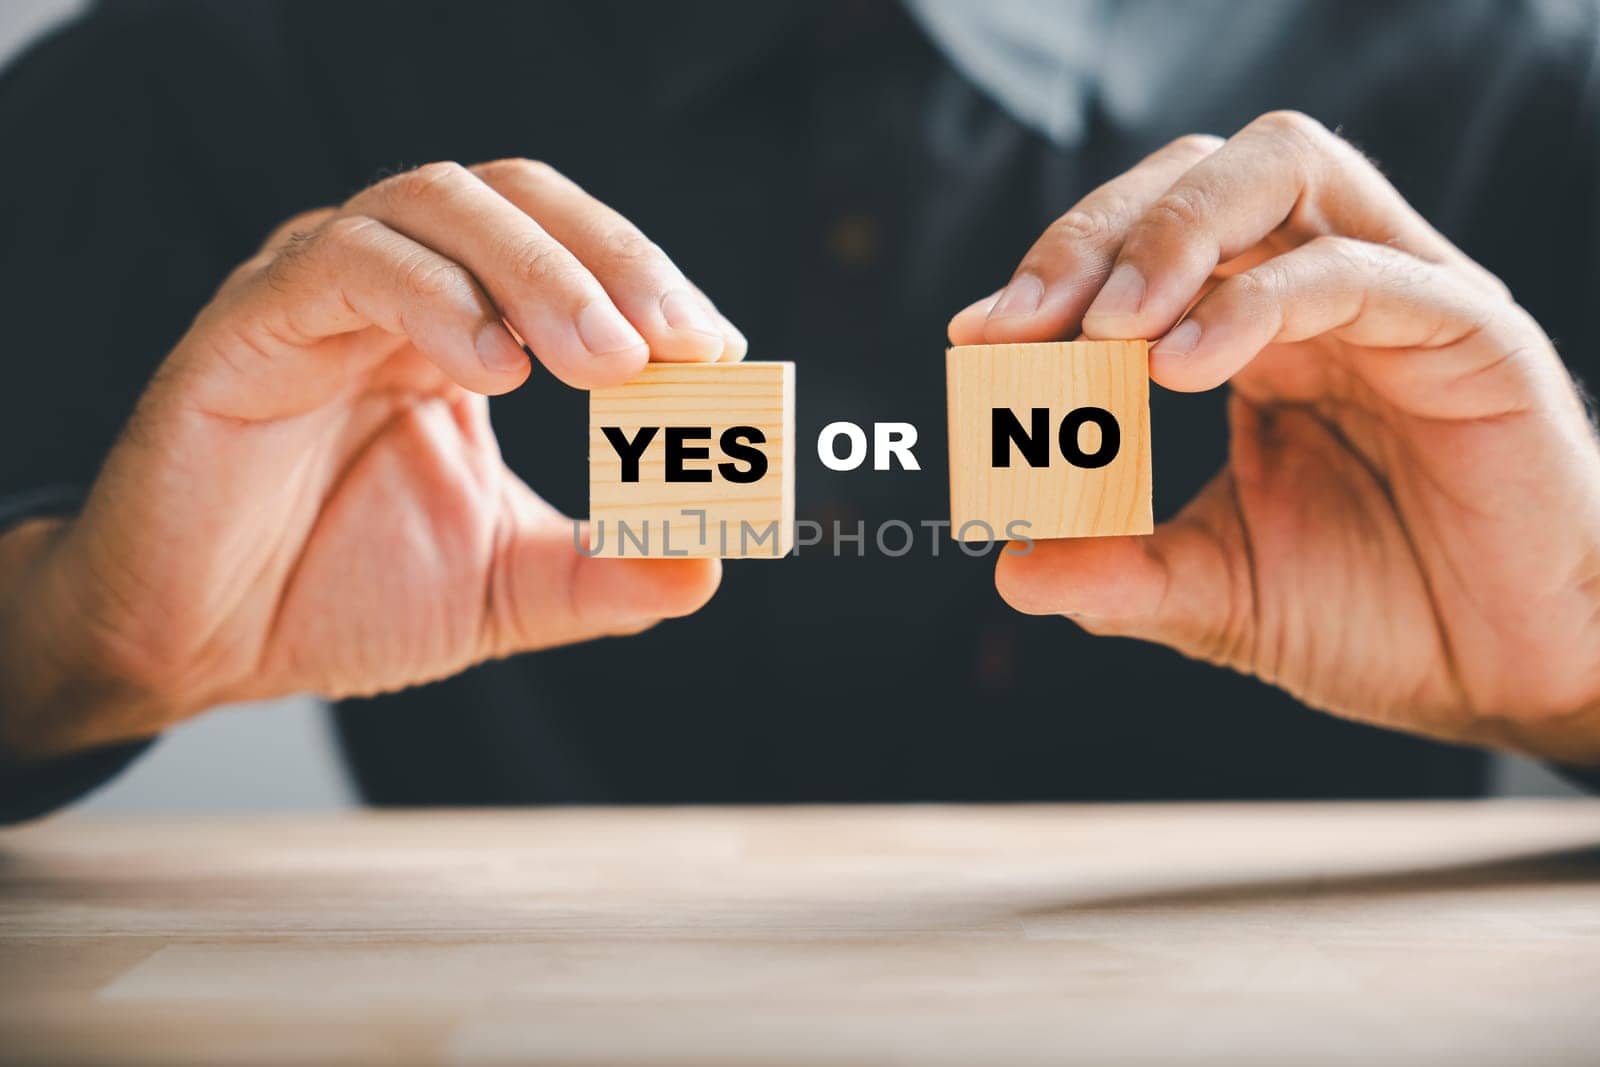 Hand holds Yes and No text on two wooden cubes, symbolizing Yes or No choice. True and false symbols for evaluation.